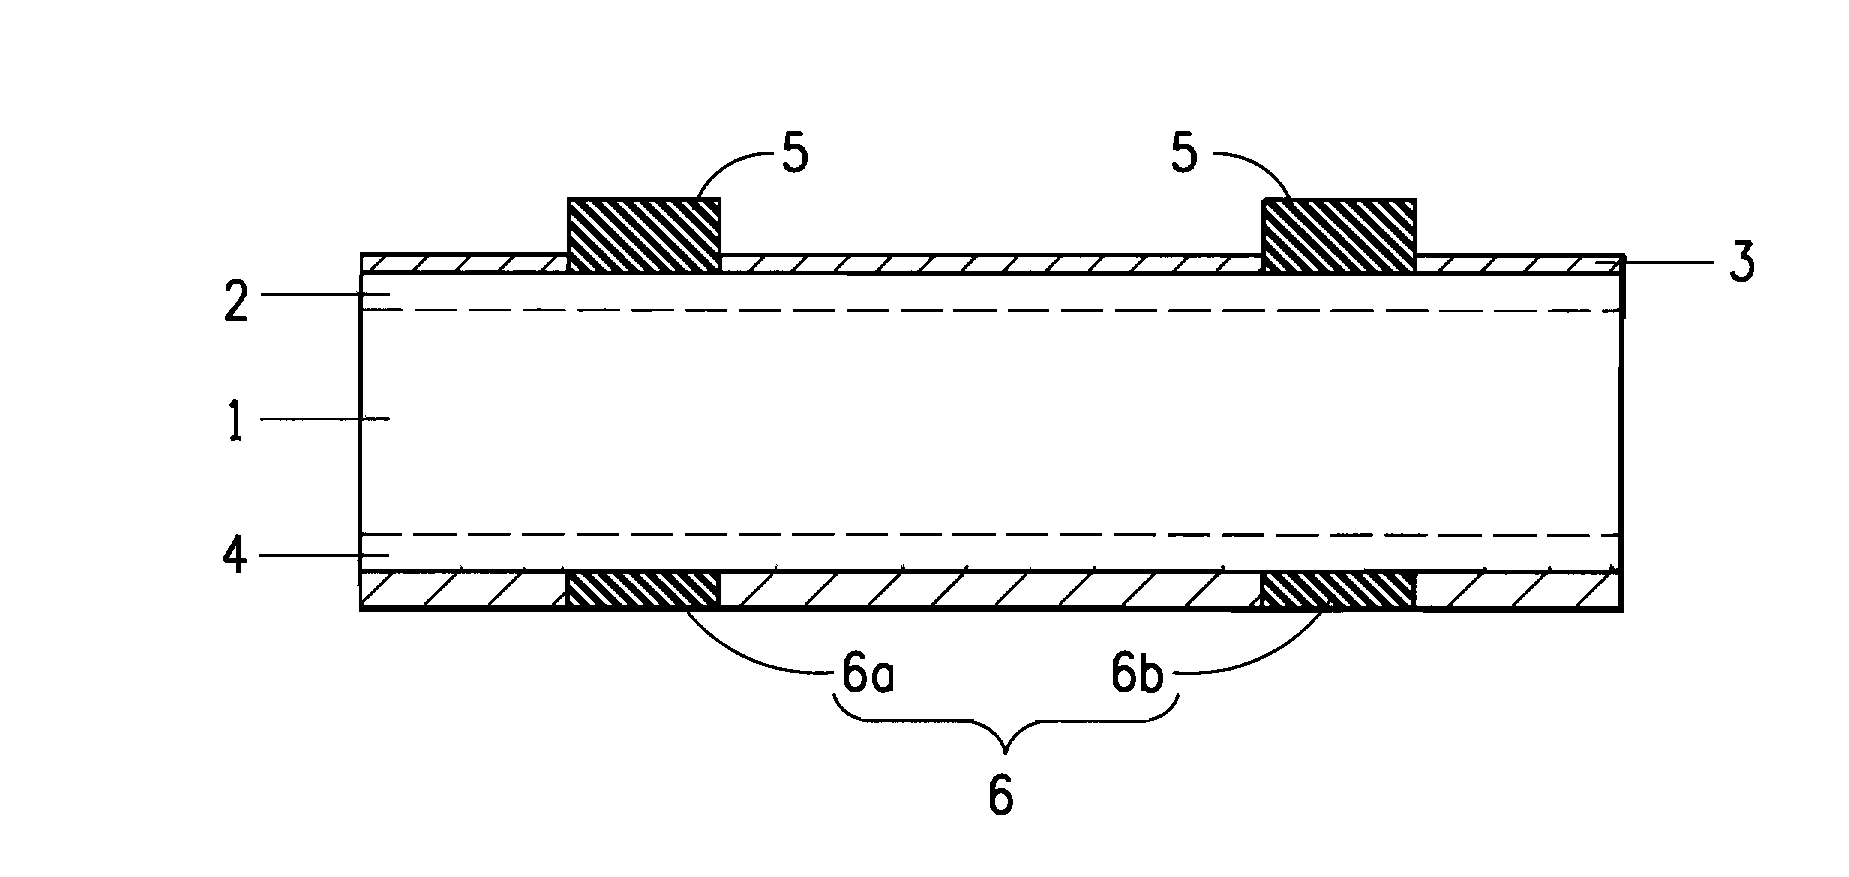 Conductive paste and grid electrode for silicon solar cells